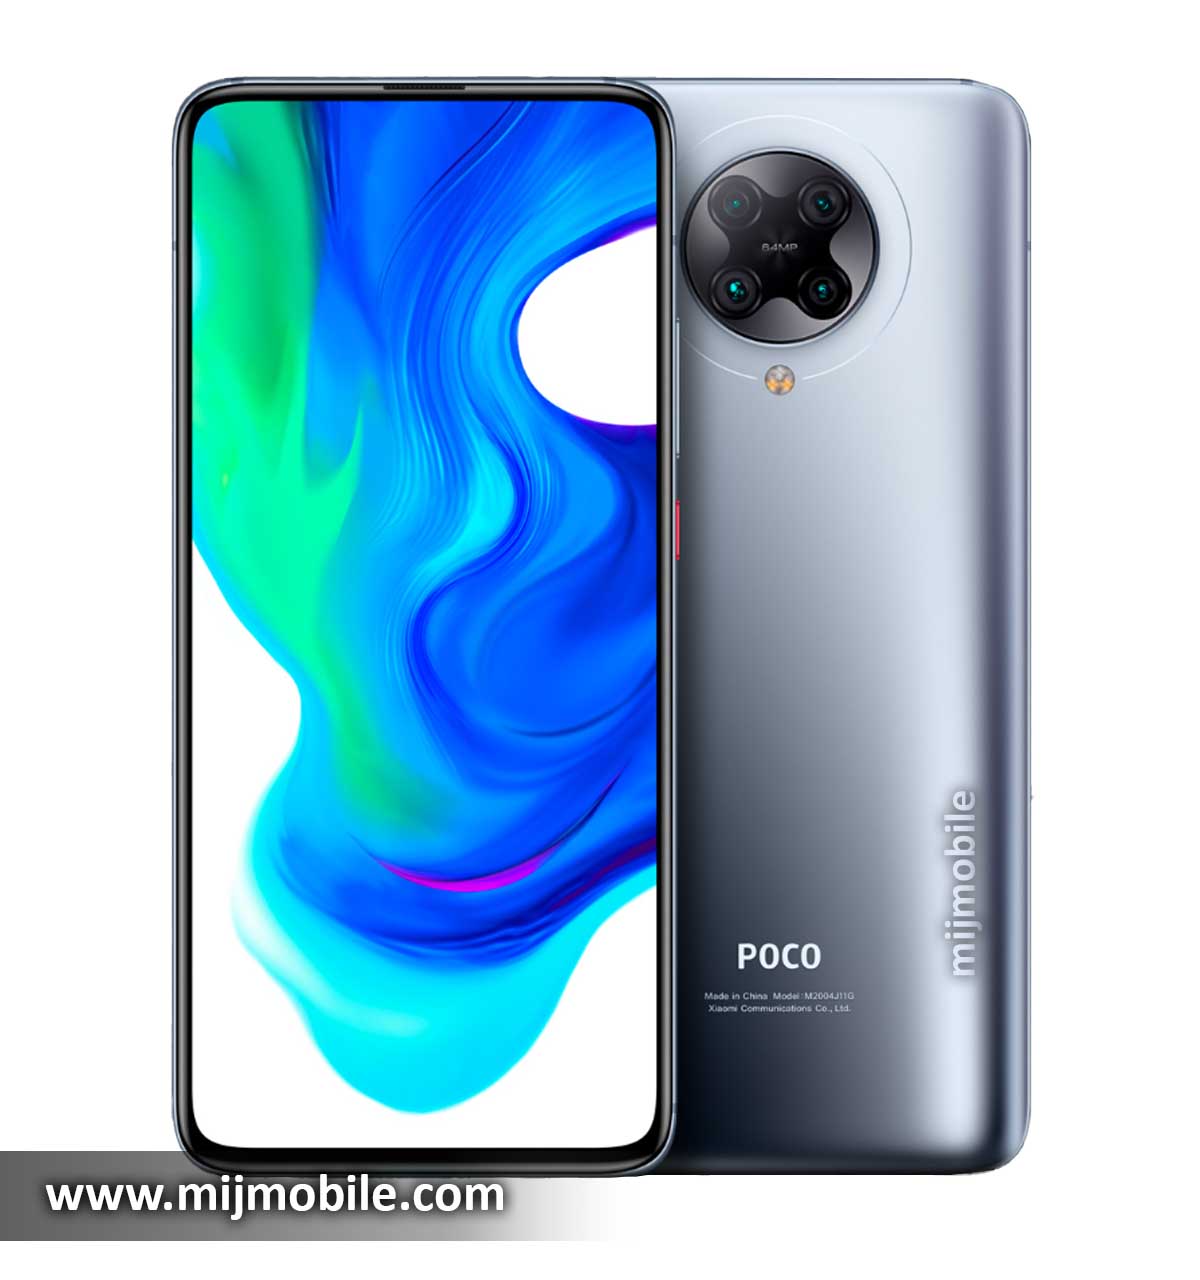 Xiaomi Pocophone F2 Pro Price in Pakistan & Specifications Xiaomi Pocophone F2 Pro Price in Pakistan is only 112,000.